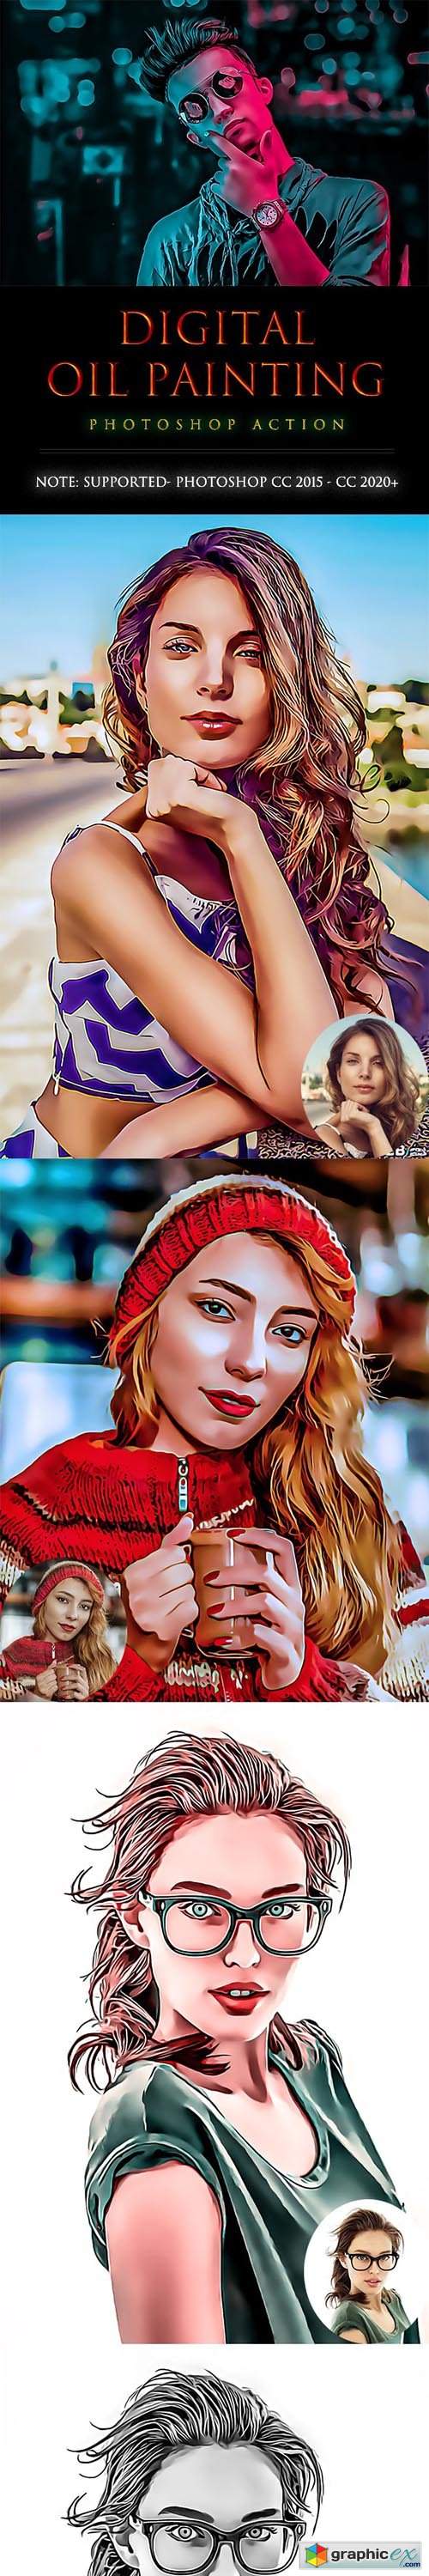 oil painting photoshop action